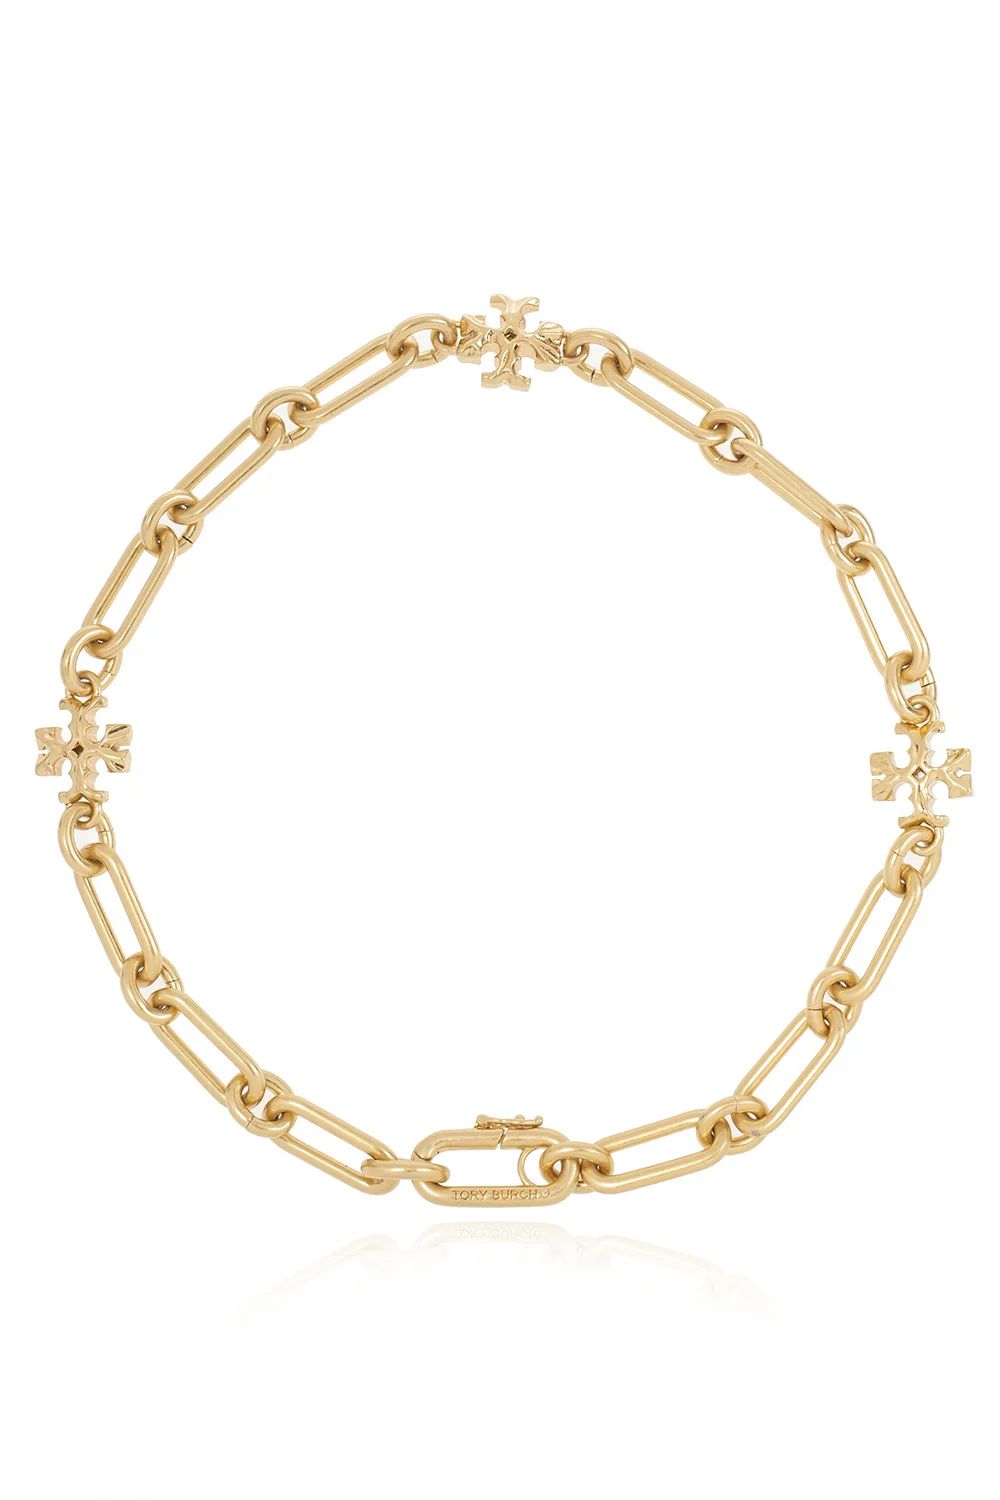 Tory Burch Roxanne Chained Short Necklace | Cettire Global